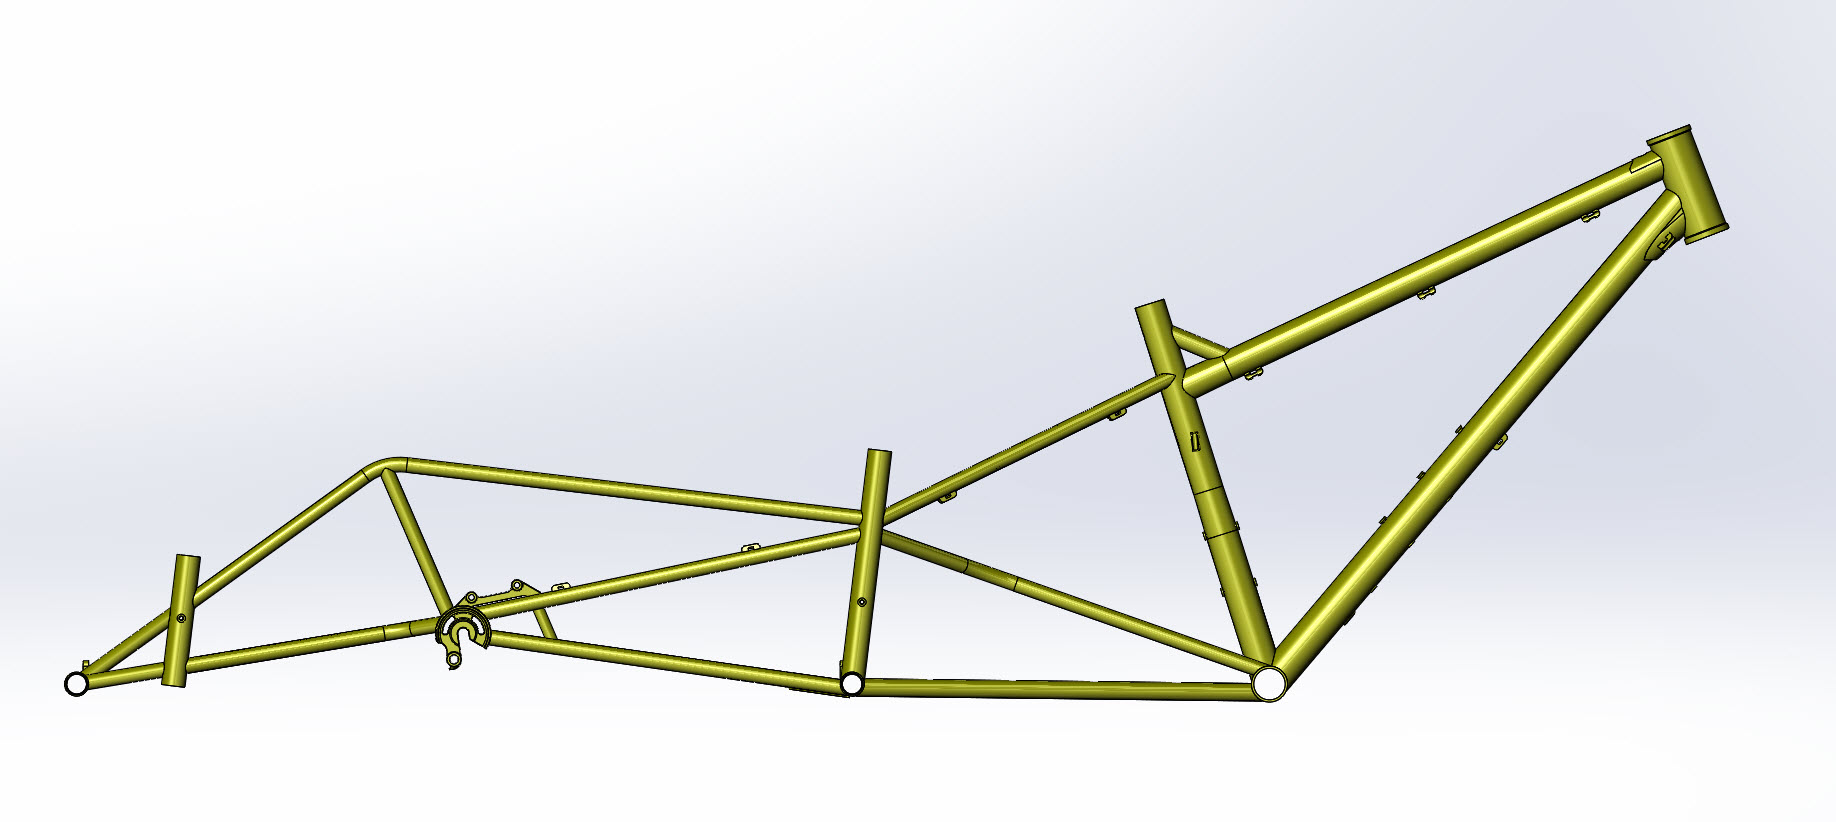 CAD illustration of a Surly Bike Fat Dummy bike frame - right side view 